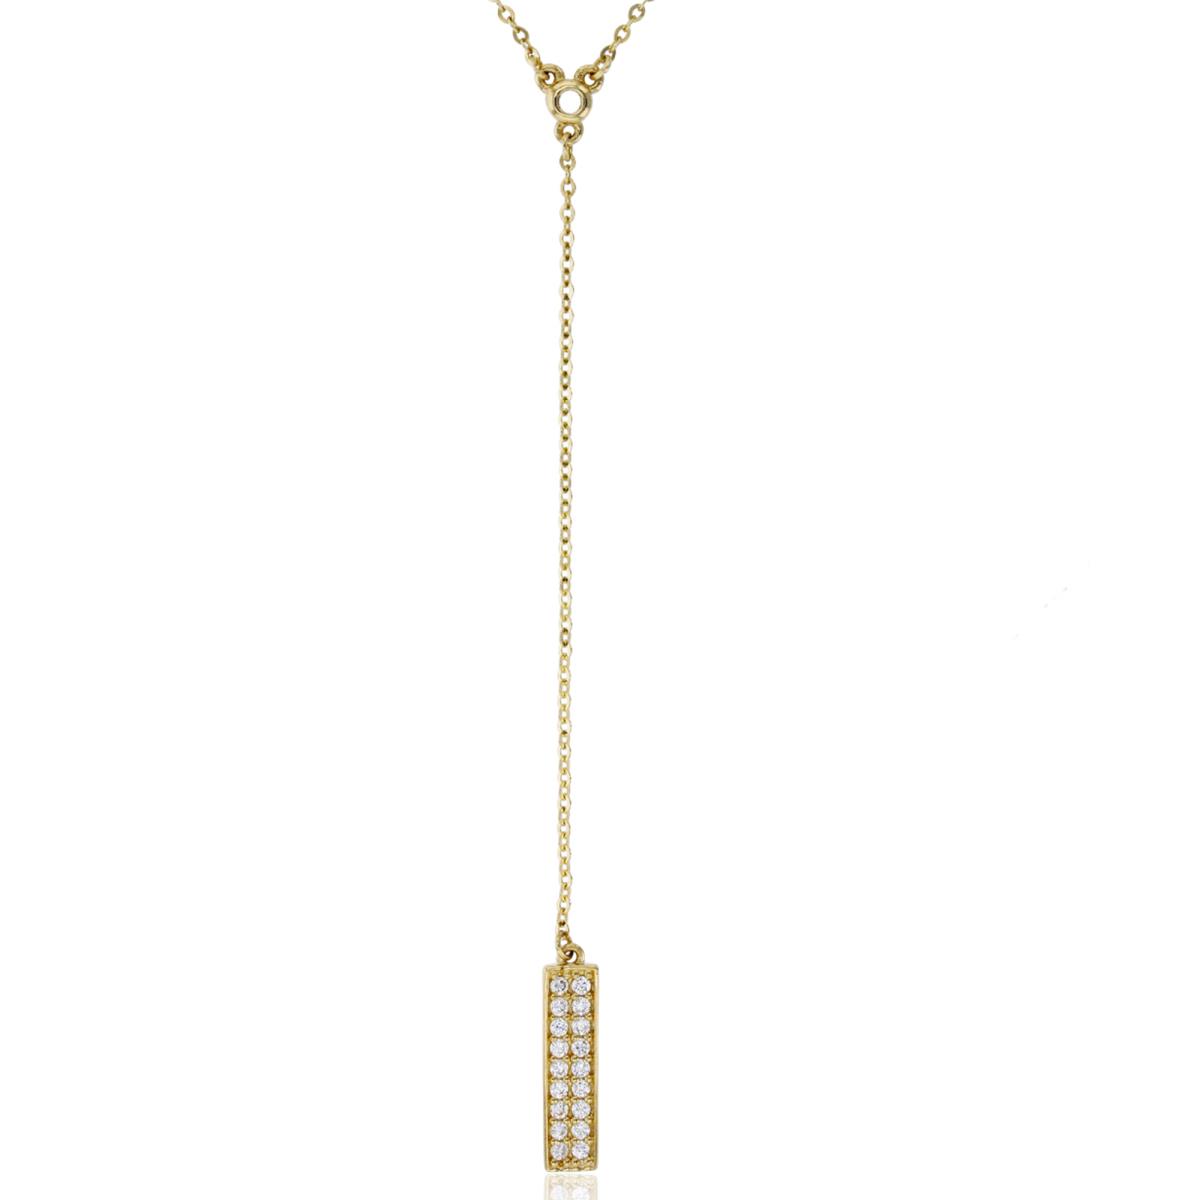 14K Yellow Gold Dangling Micropave 2-Row Straight Bar 17" Necklace